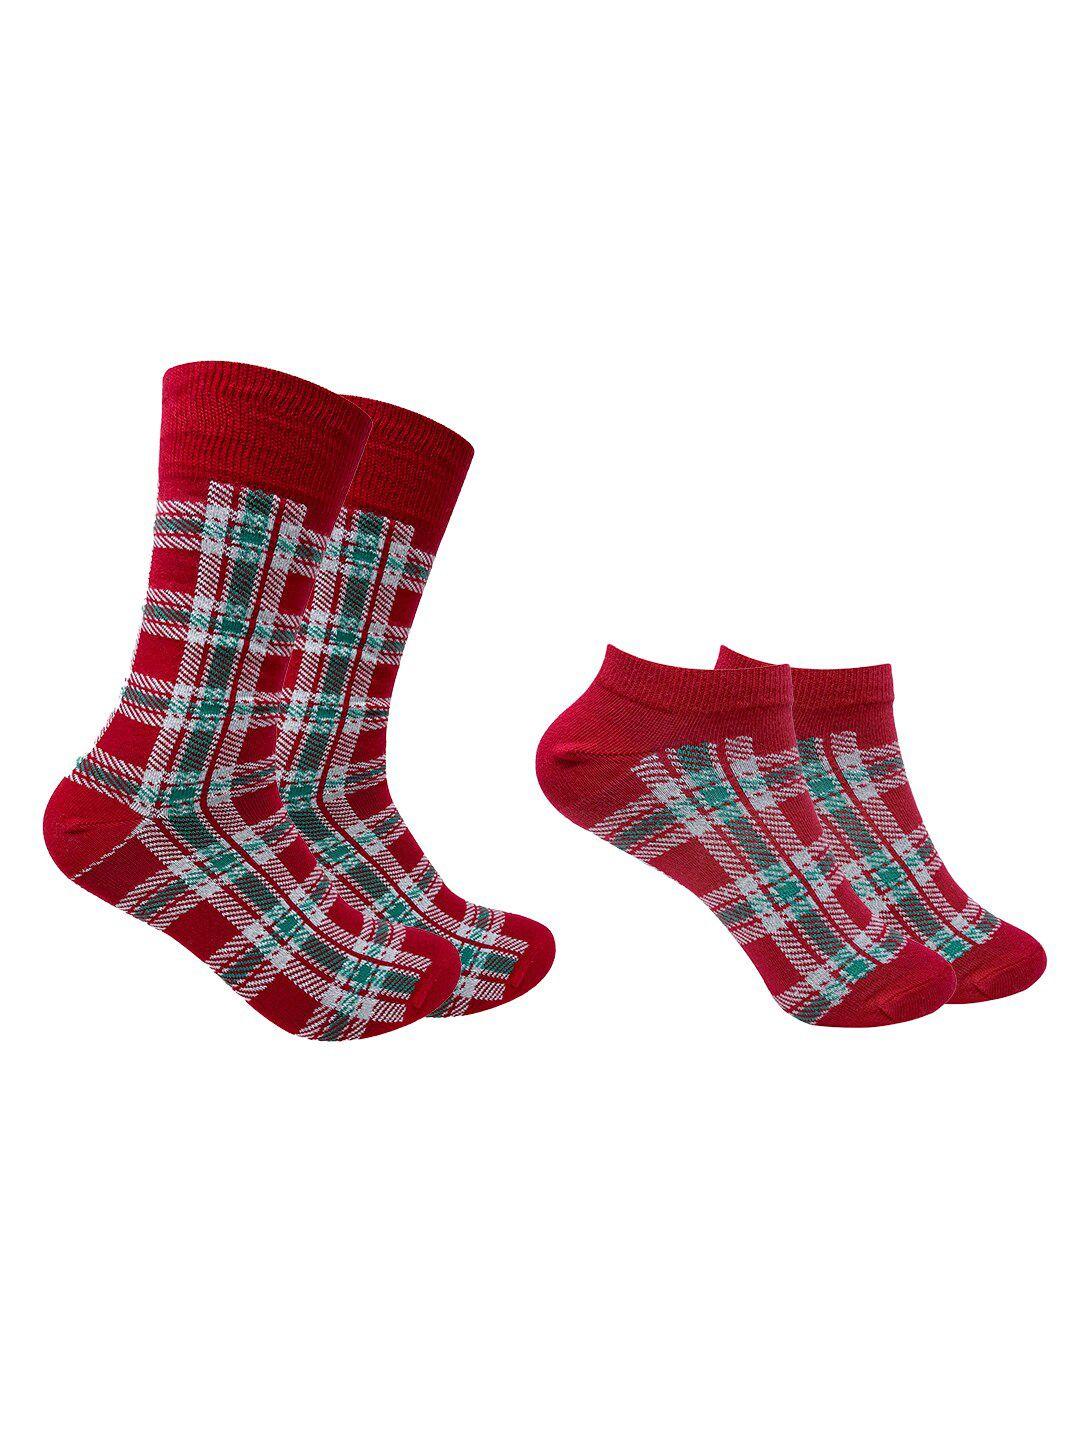 mint & oak red & white pack of 2 checked patterned cotton socks